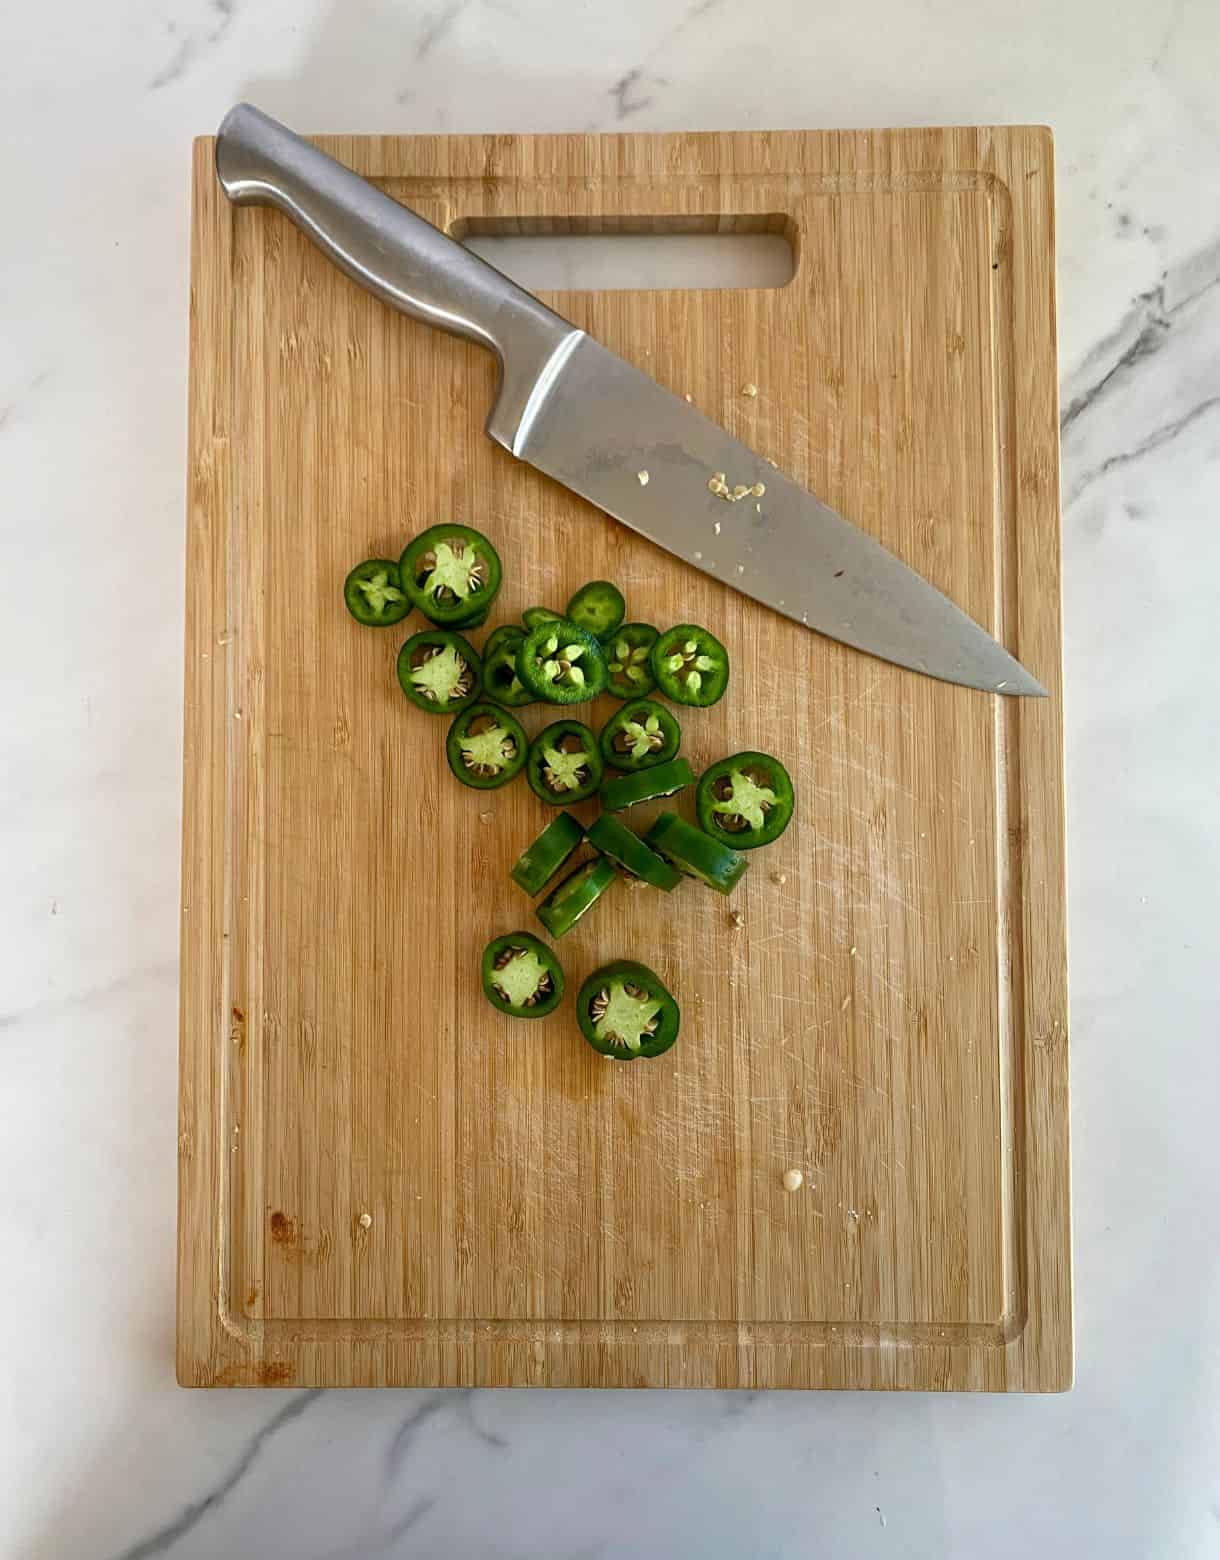 A cutting board with a knife and a sliced jalapeno.